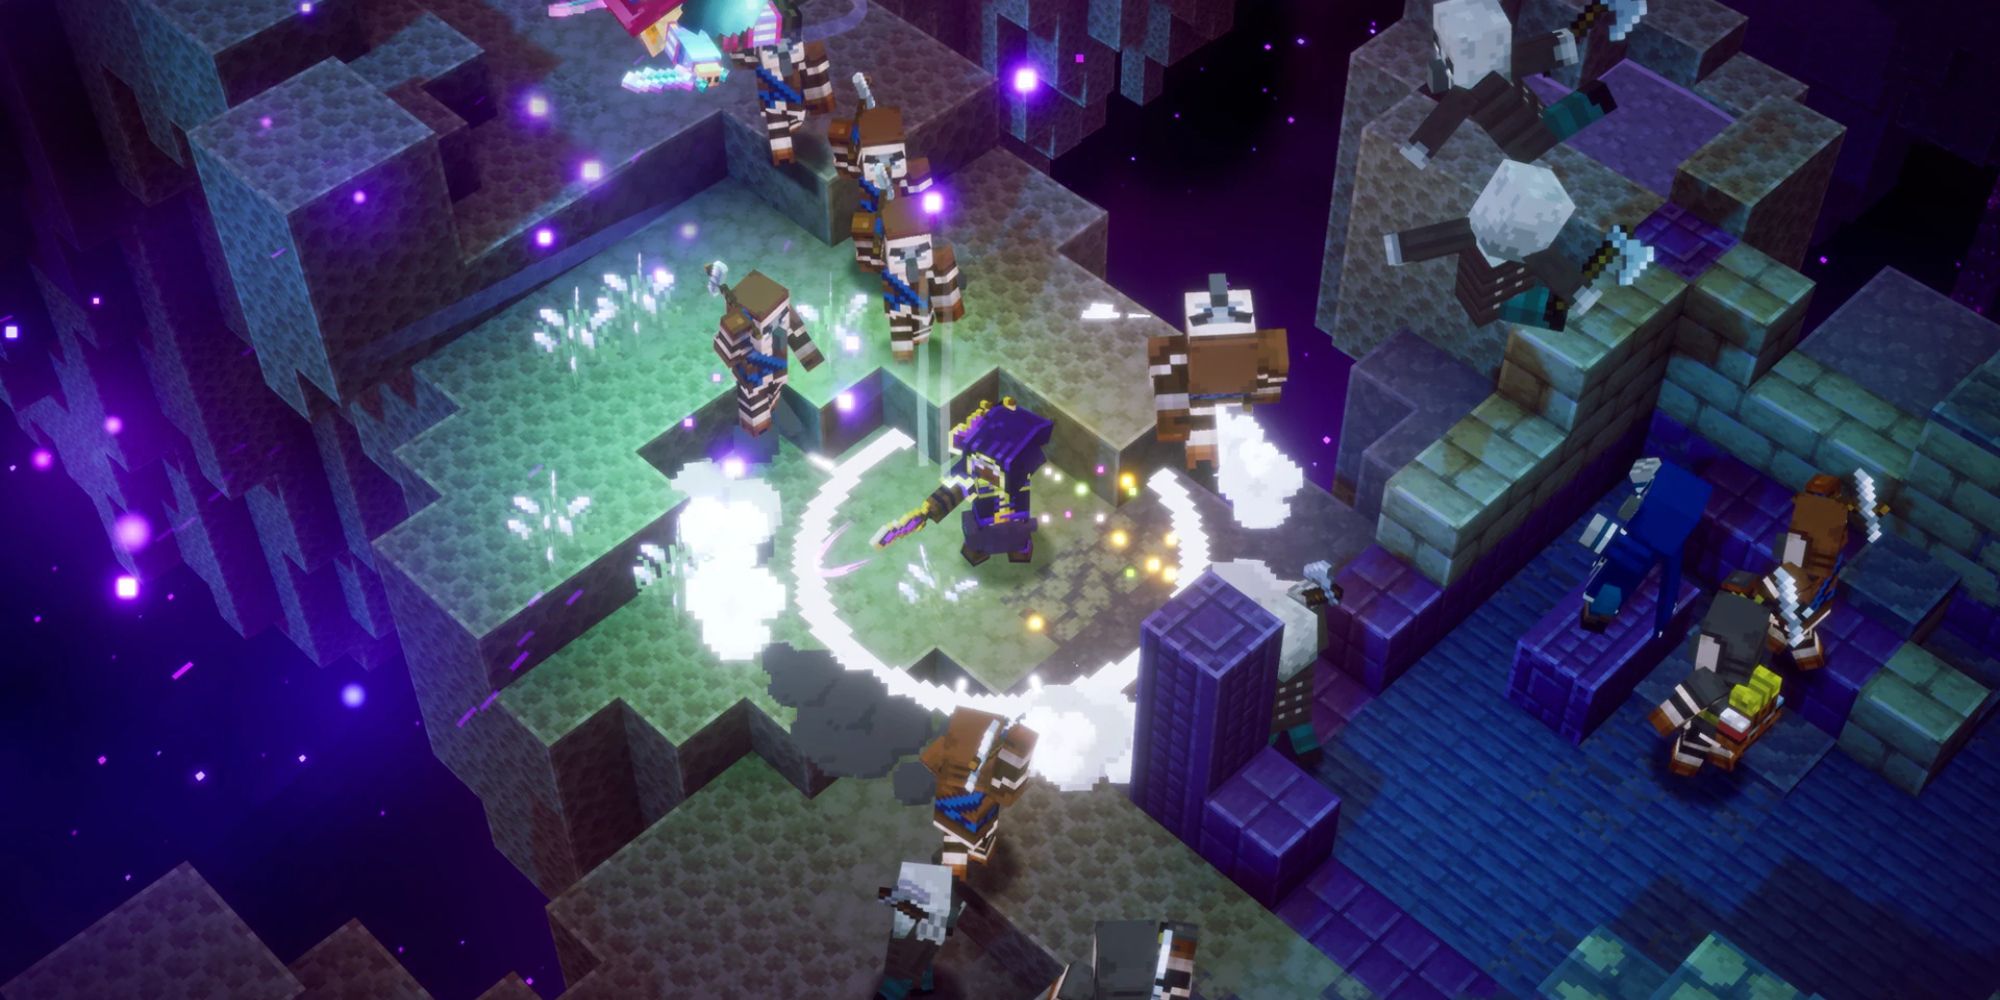 An image from the Minecraft Dungeons Echoing Void DLC, showing a player fighting off a horde of Illagers.